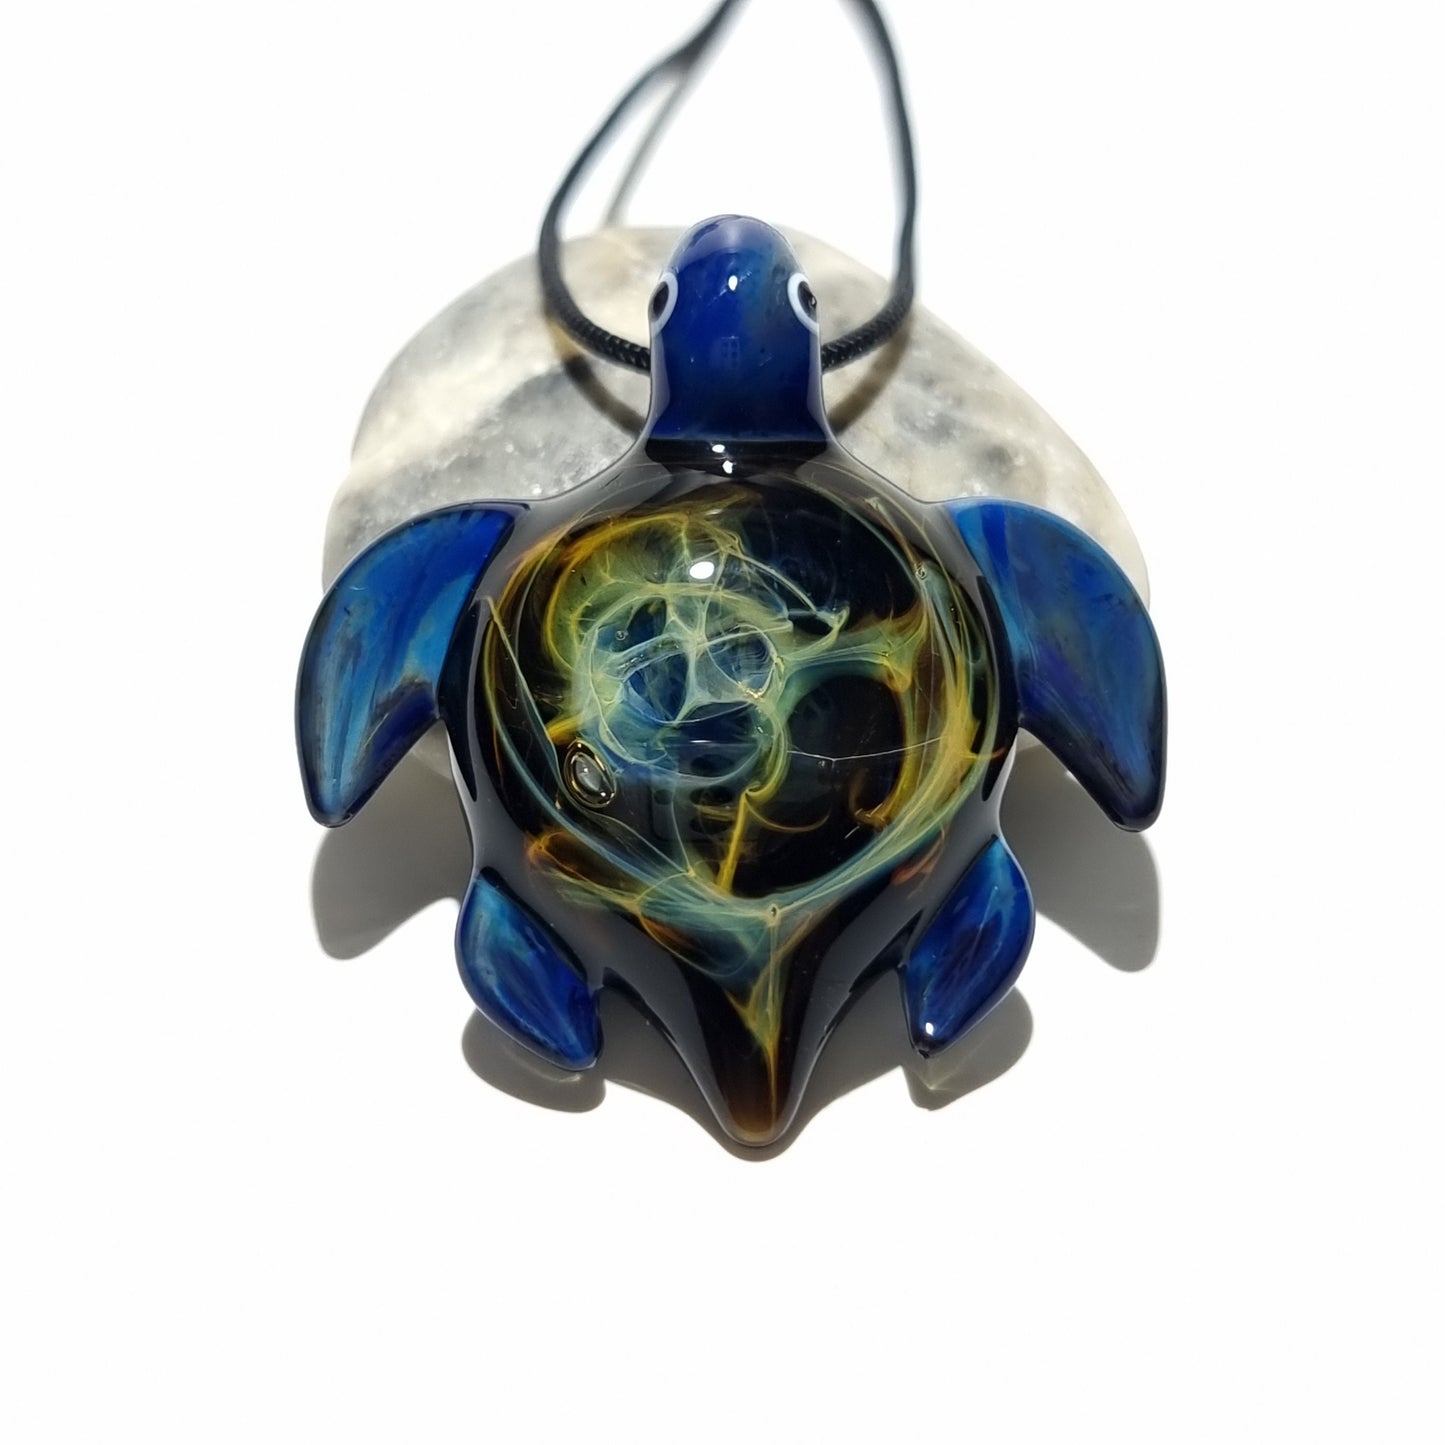 Glass Turtle - Baby Aurora Turtle Pendant - Glass Pendant - Glass Jewelry - Blown Glass - Artist Signed - Details of Silver